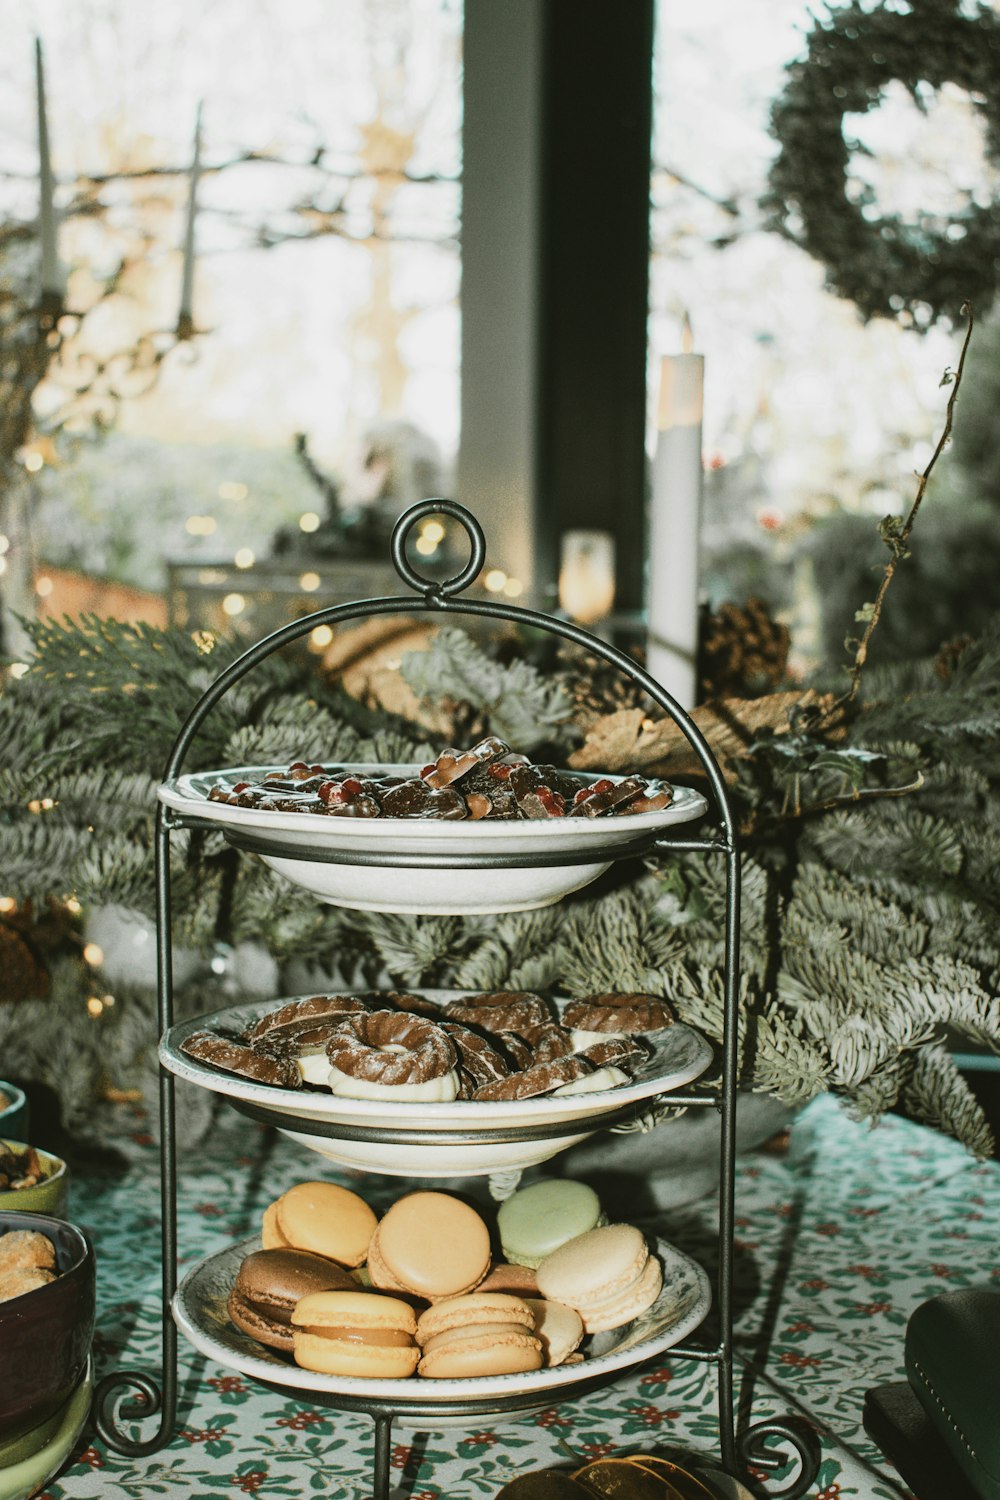 three tiered trays of cookies and pastries on a table